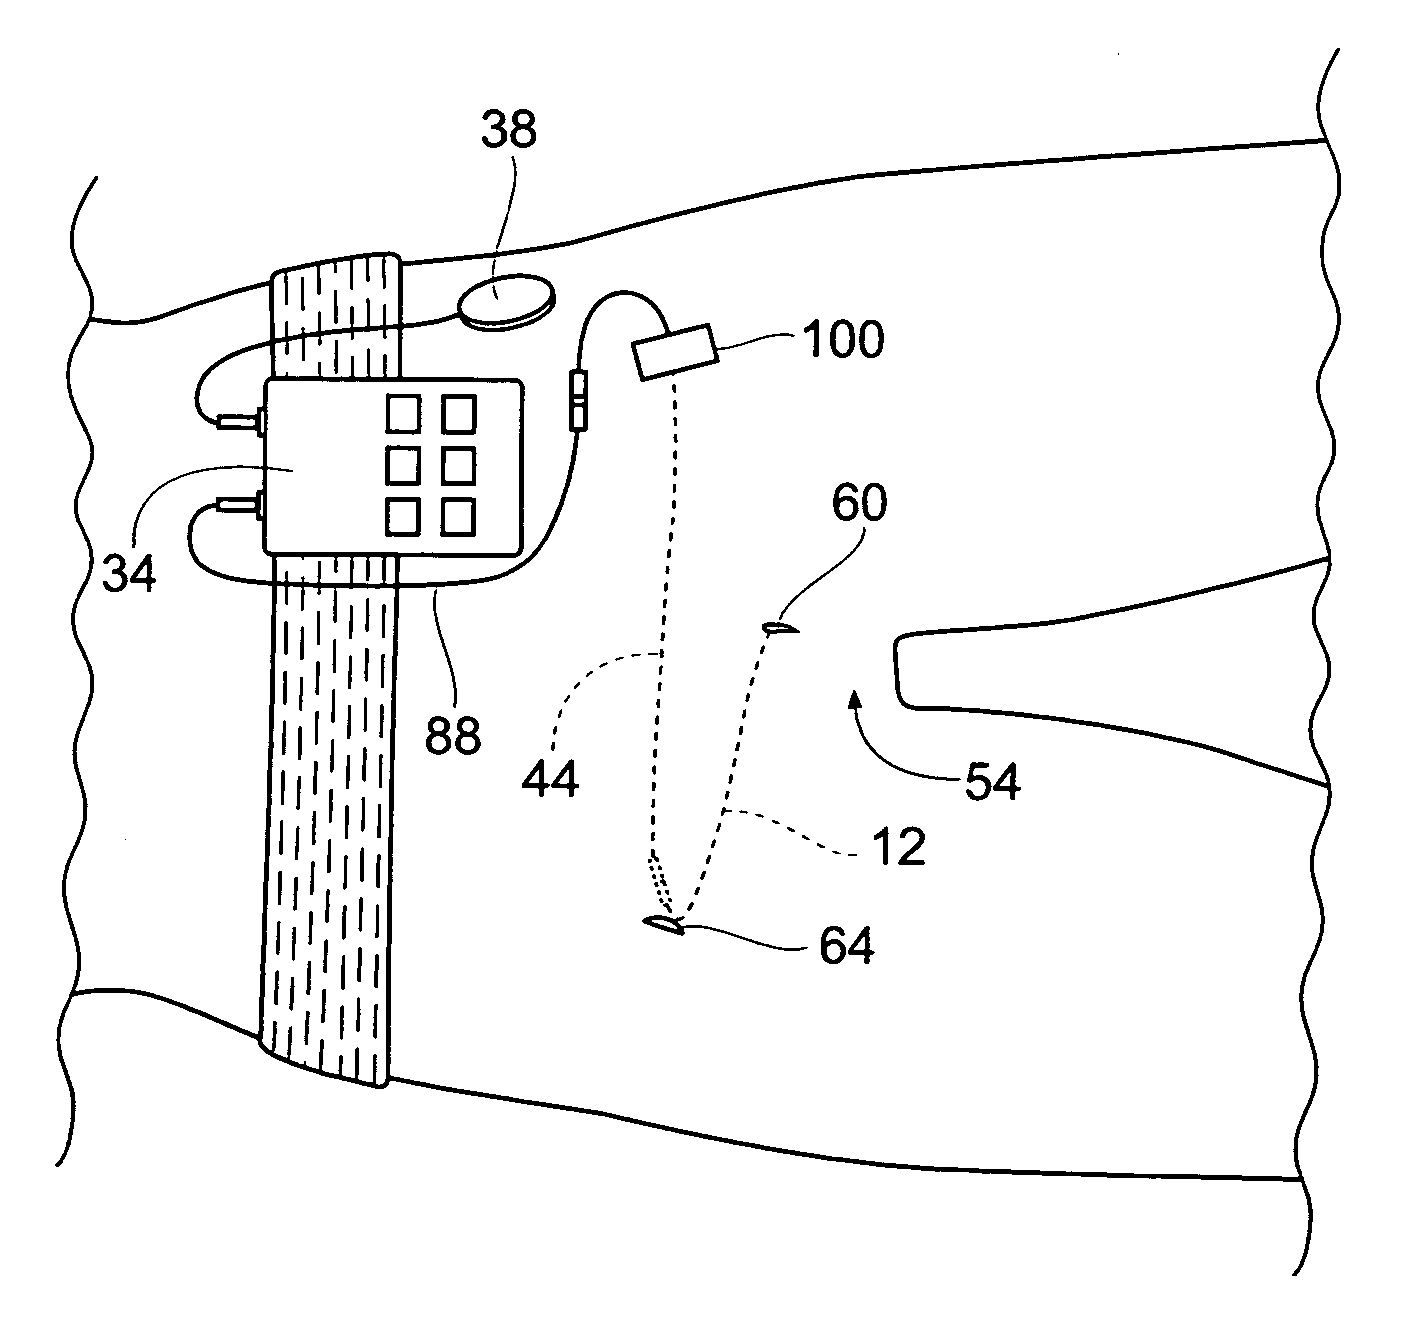 Systems and methods for bilateral stimulation of left and right branches of the dorsal genital nerves to treat dysfunctions, such as urinary incontinence